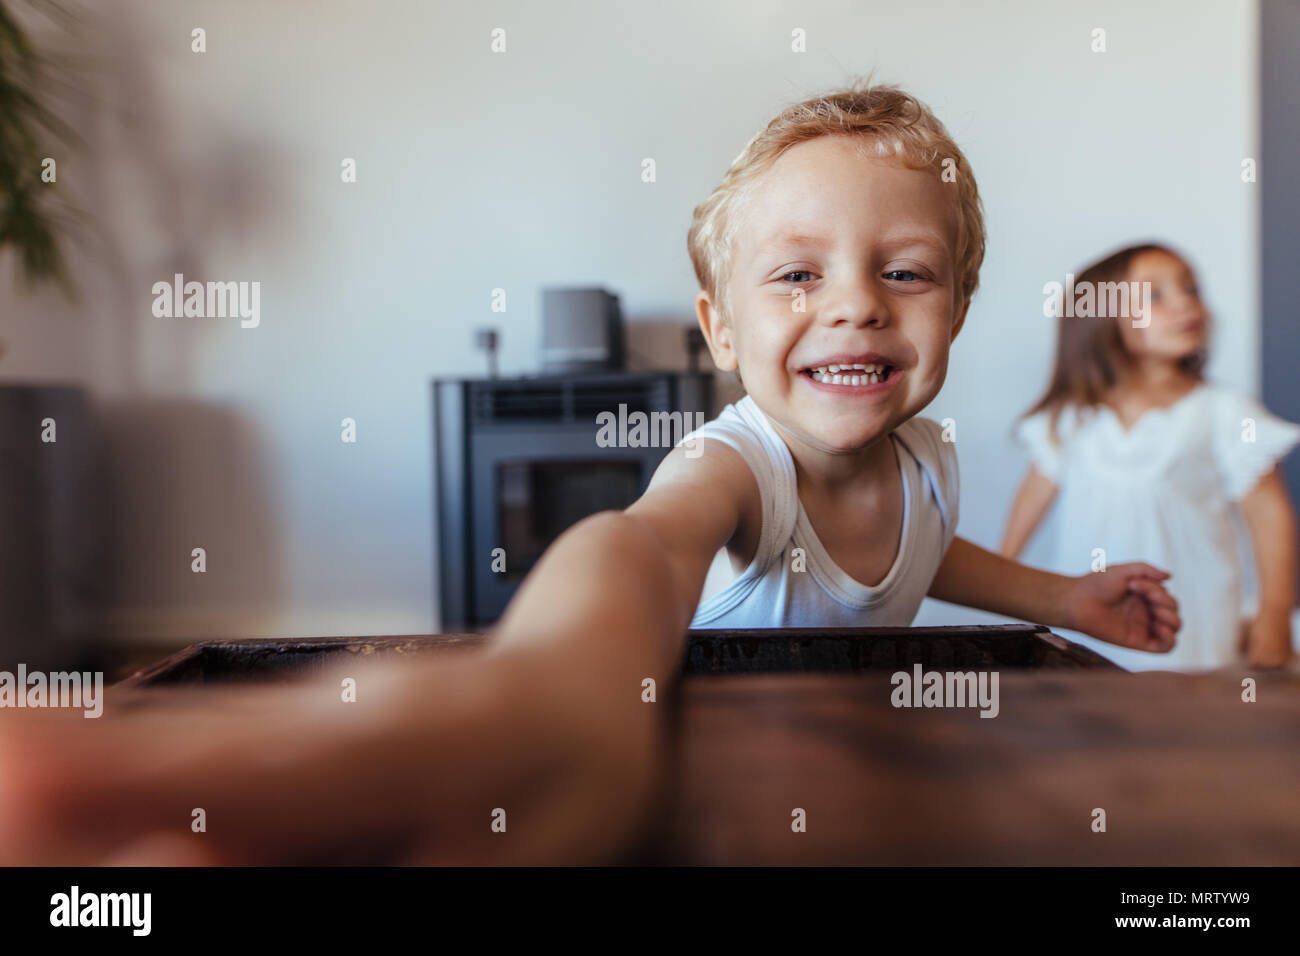 Adorable little boy touching something and smiling with his sister standing at the back. Kids playing at home. Stock Photo